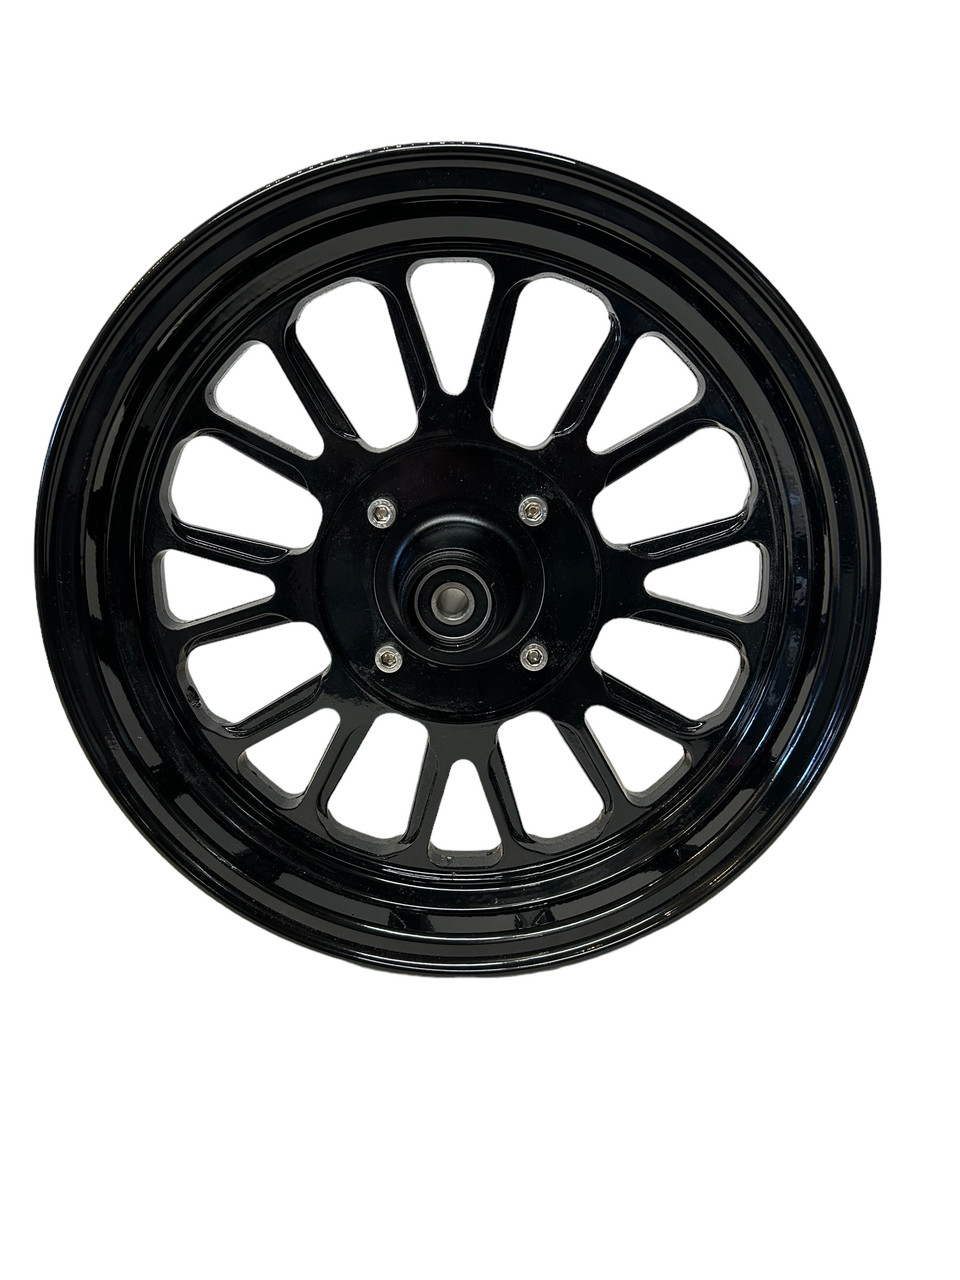 12 Inch Machined Aluminum Front Wheel and Hub BLACK